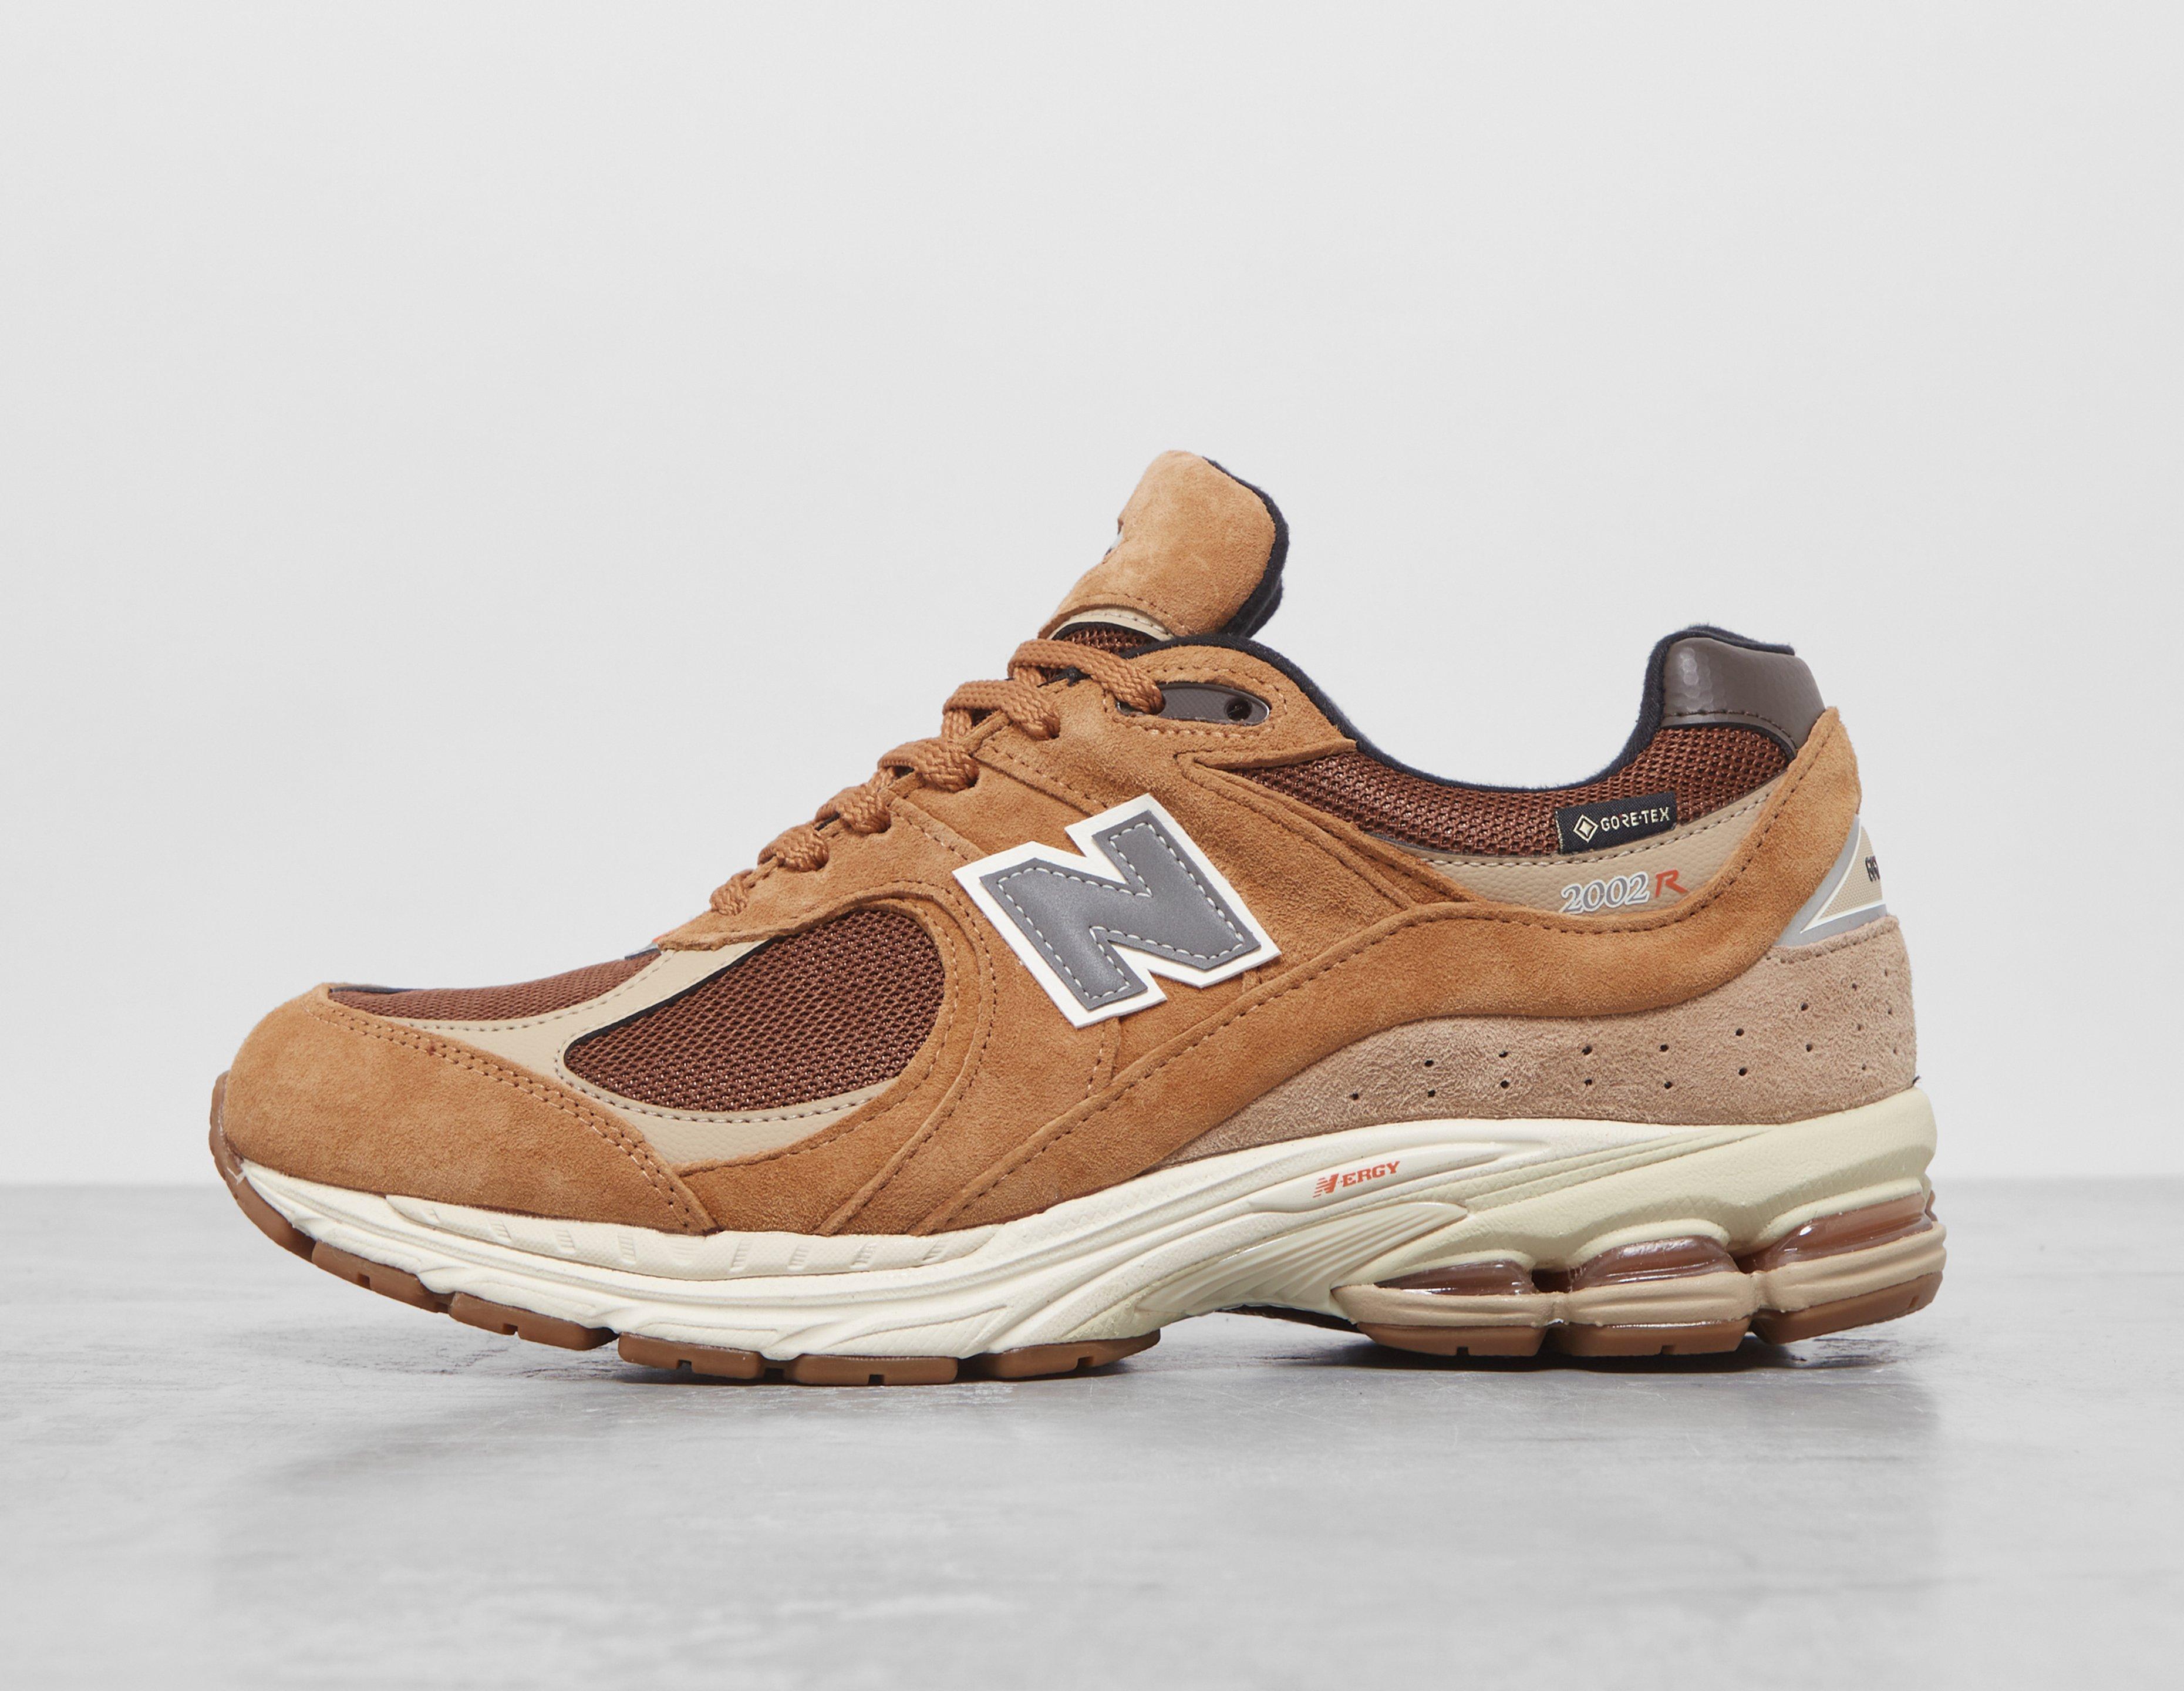 Brown New Balance 2002R | Homme New Balance 880v9 Supercell Orion